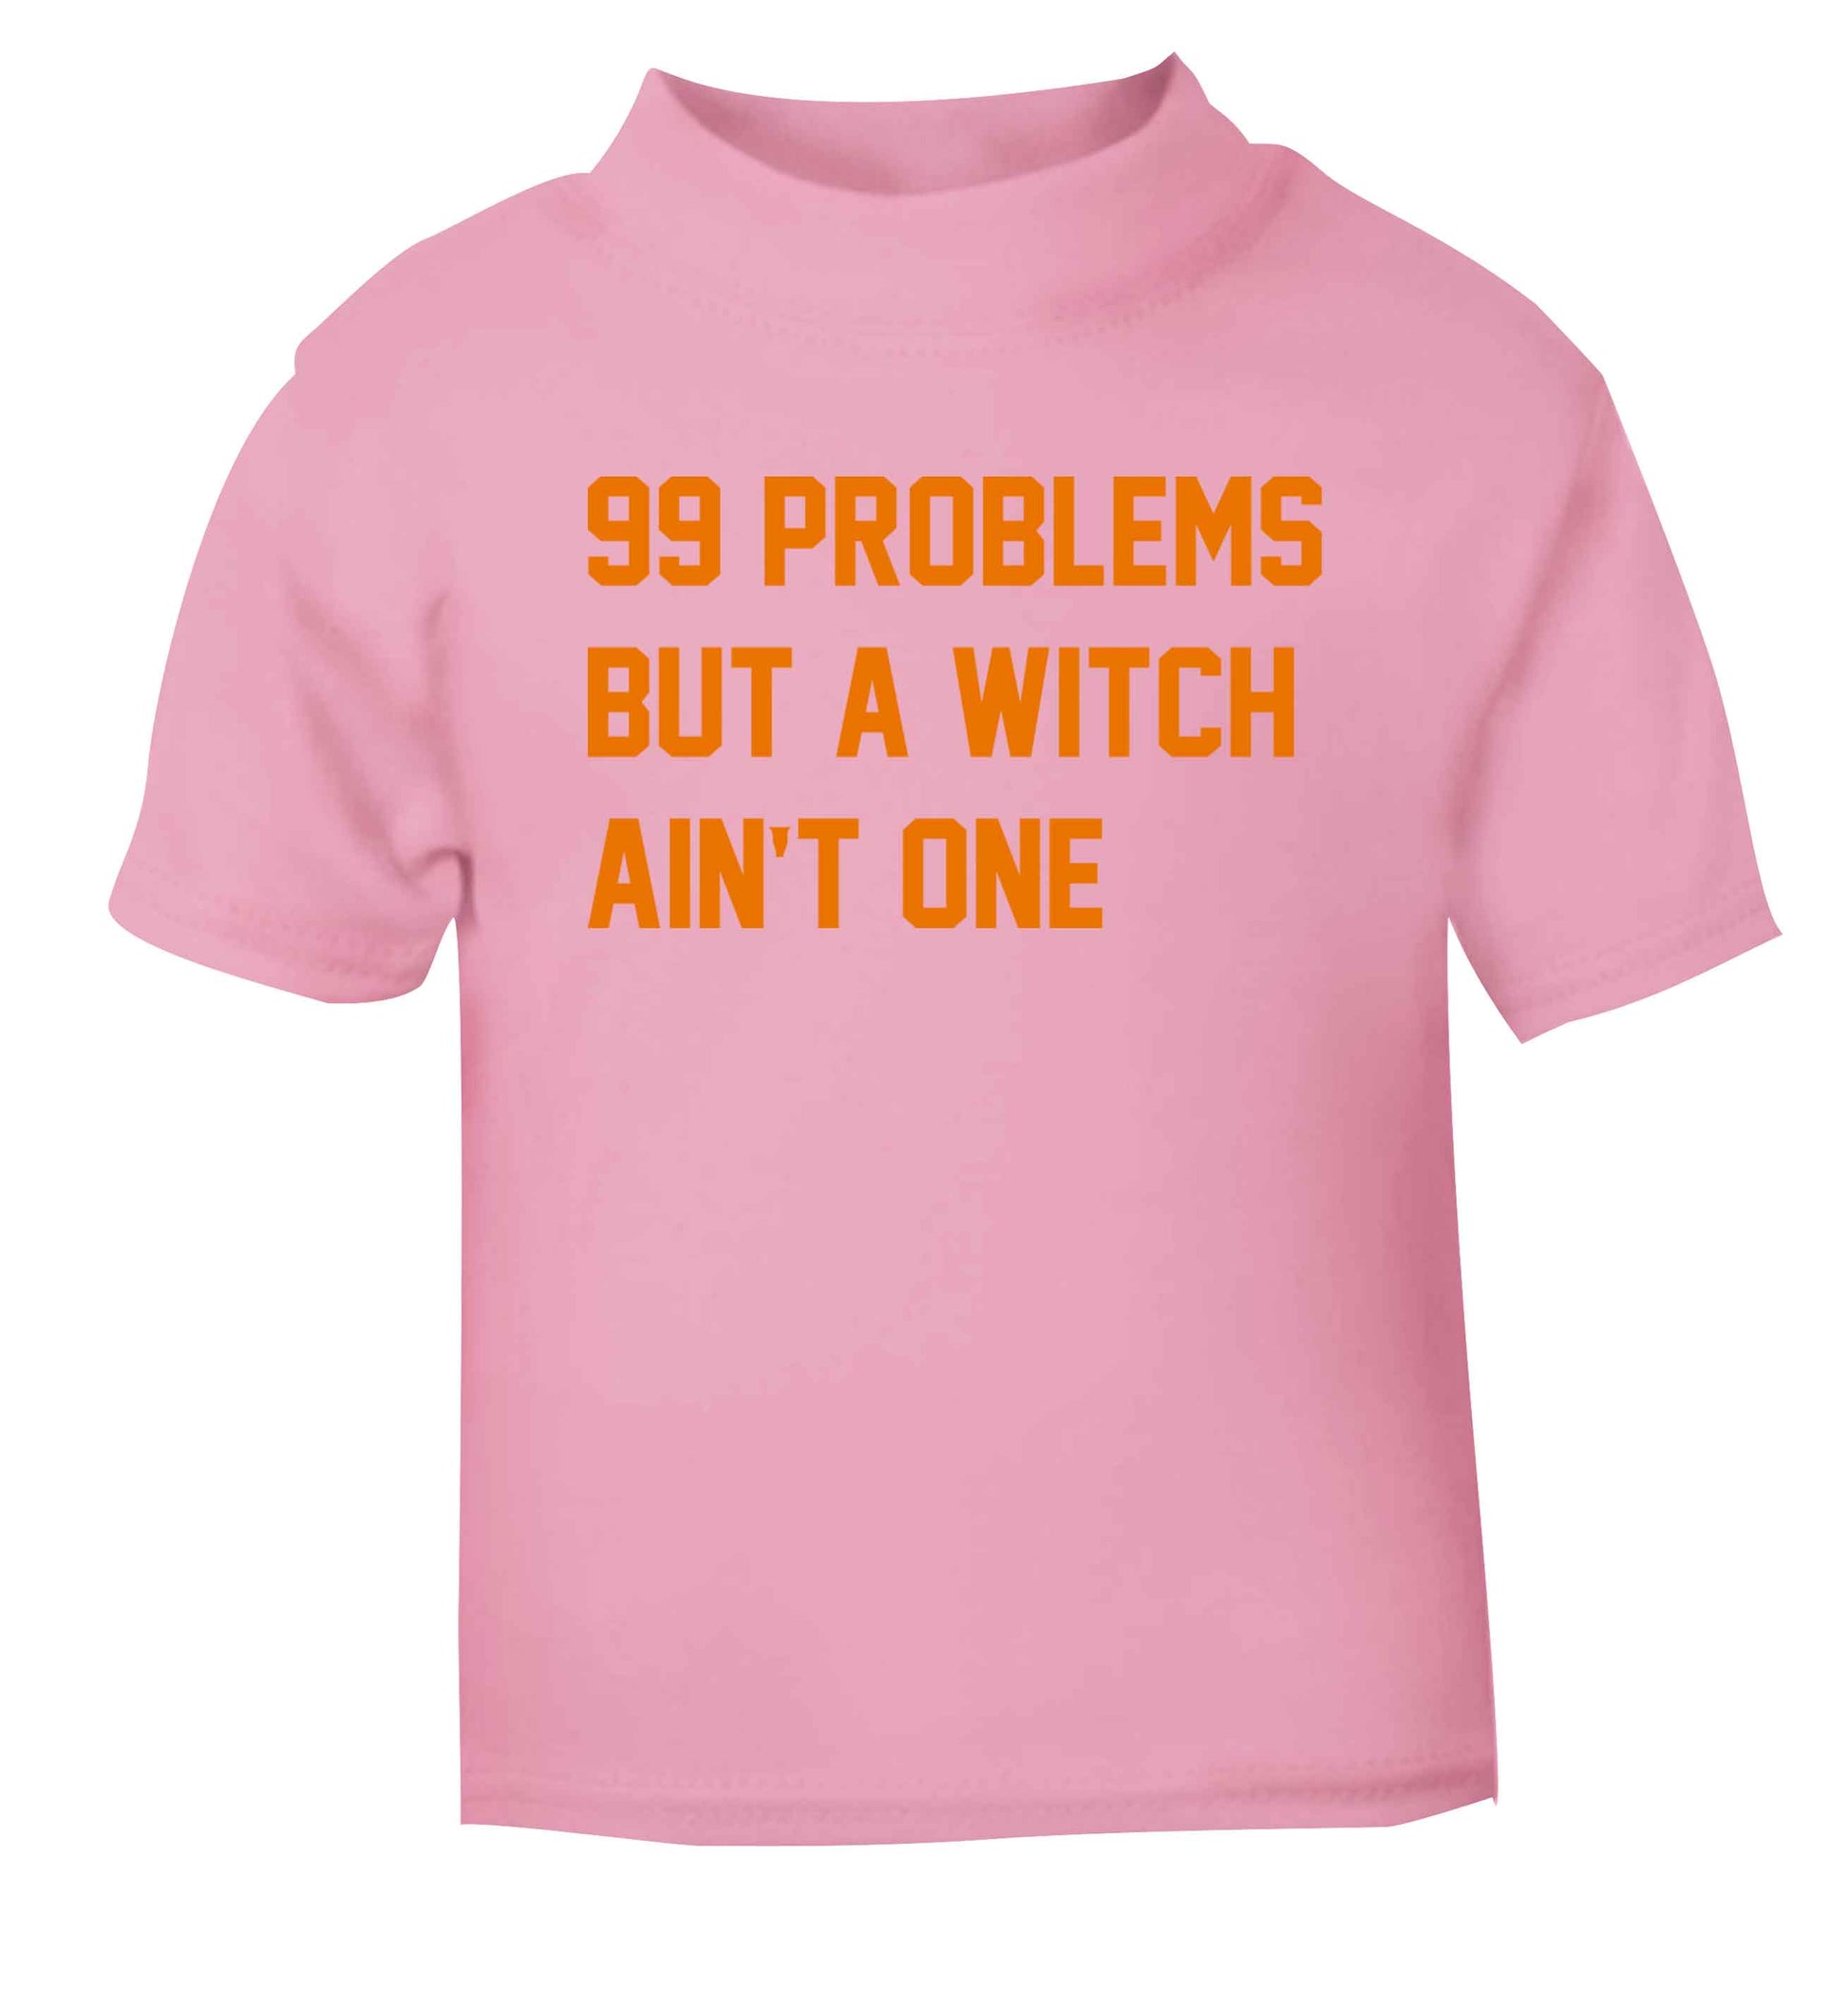 99 Problems but a witch aint one light pink baby toddler Tshirt 2 Years